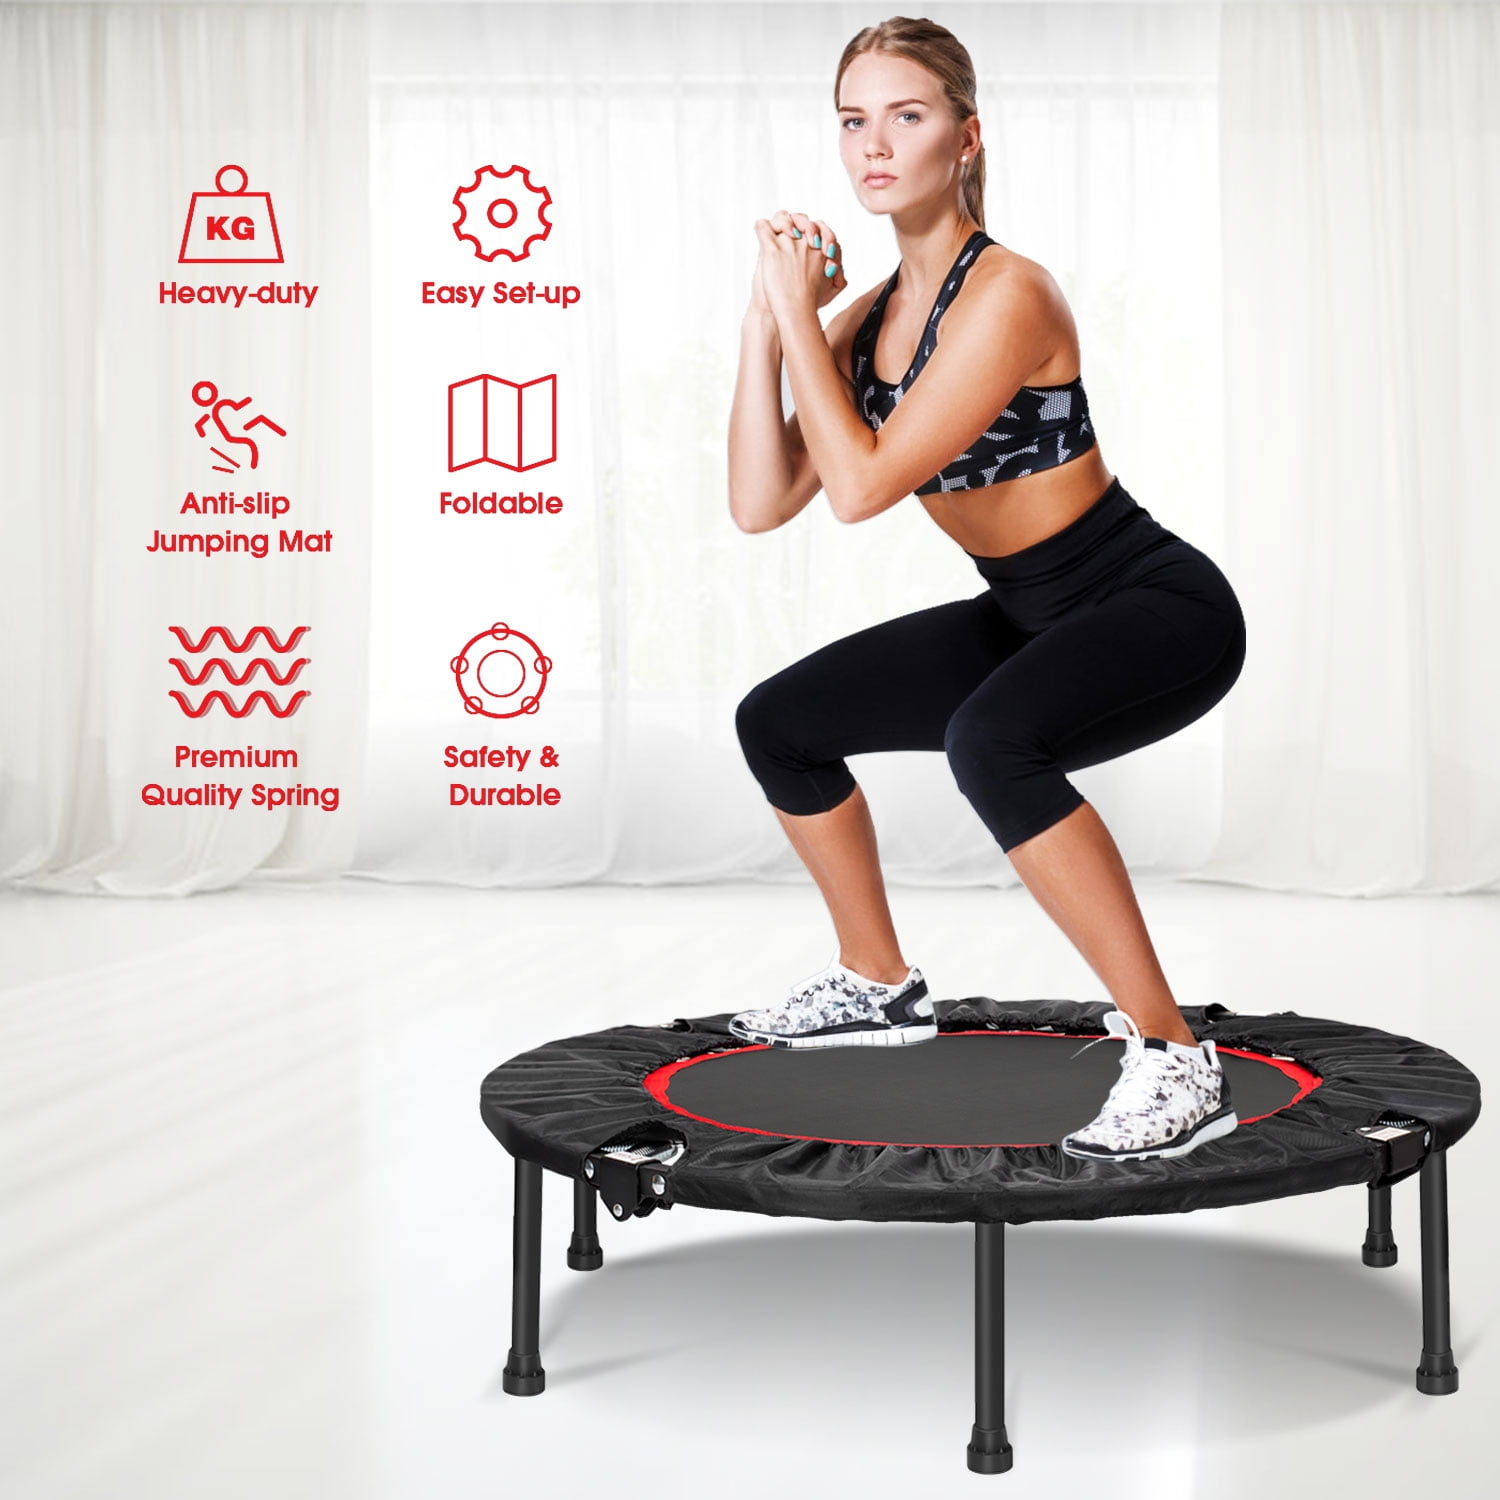 arteesol Mini Trampoline 40-inch Rebounder Foldable Noiseless Small Trampoline with Safety Pad Adjustable Foam Handle for Indoor/Outdoor Exercise Fitness Trampoline 